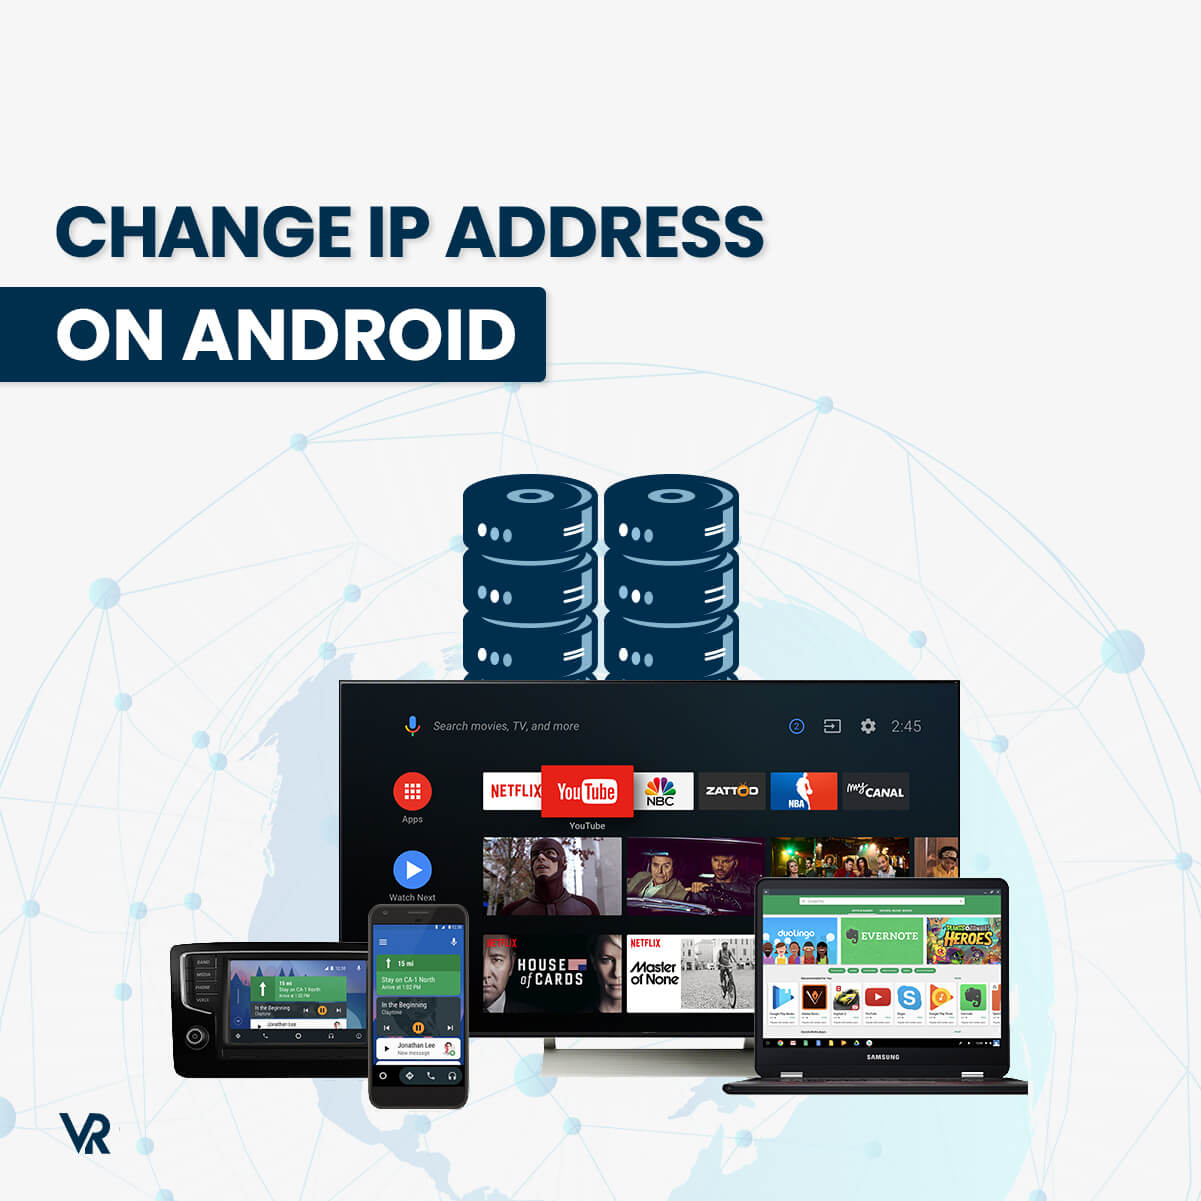 Change-Ip-Address-on-Android-Featured